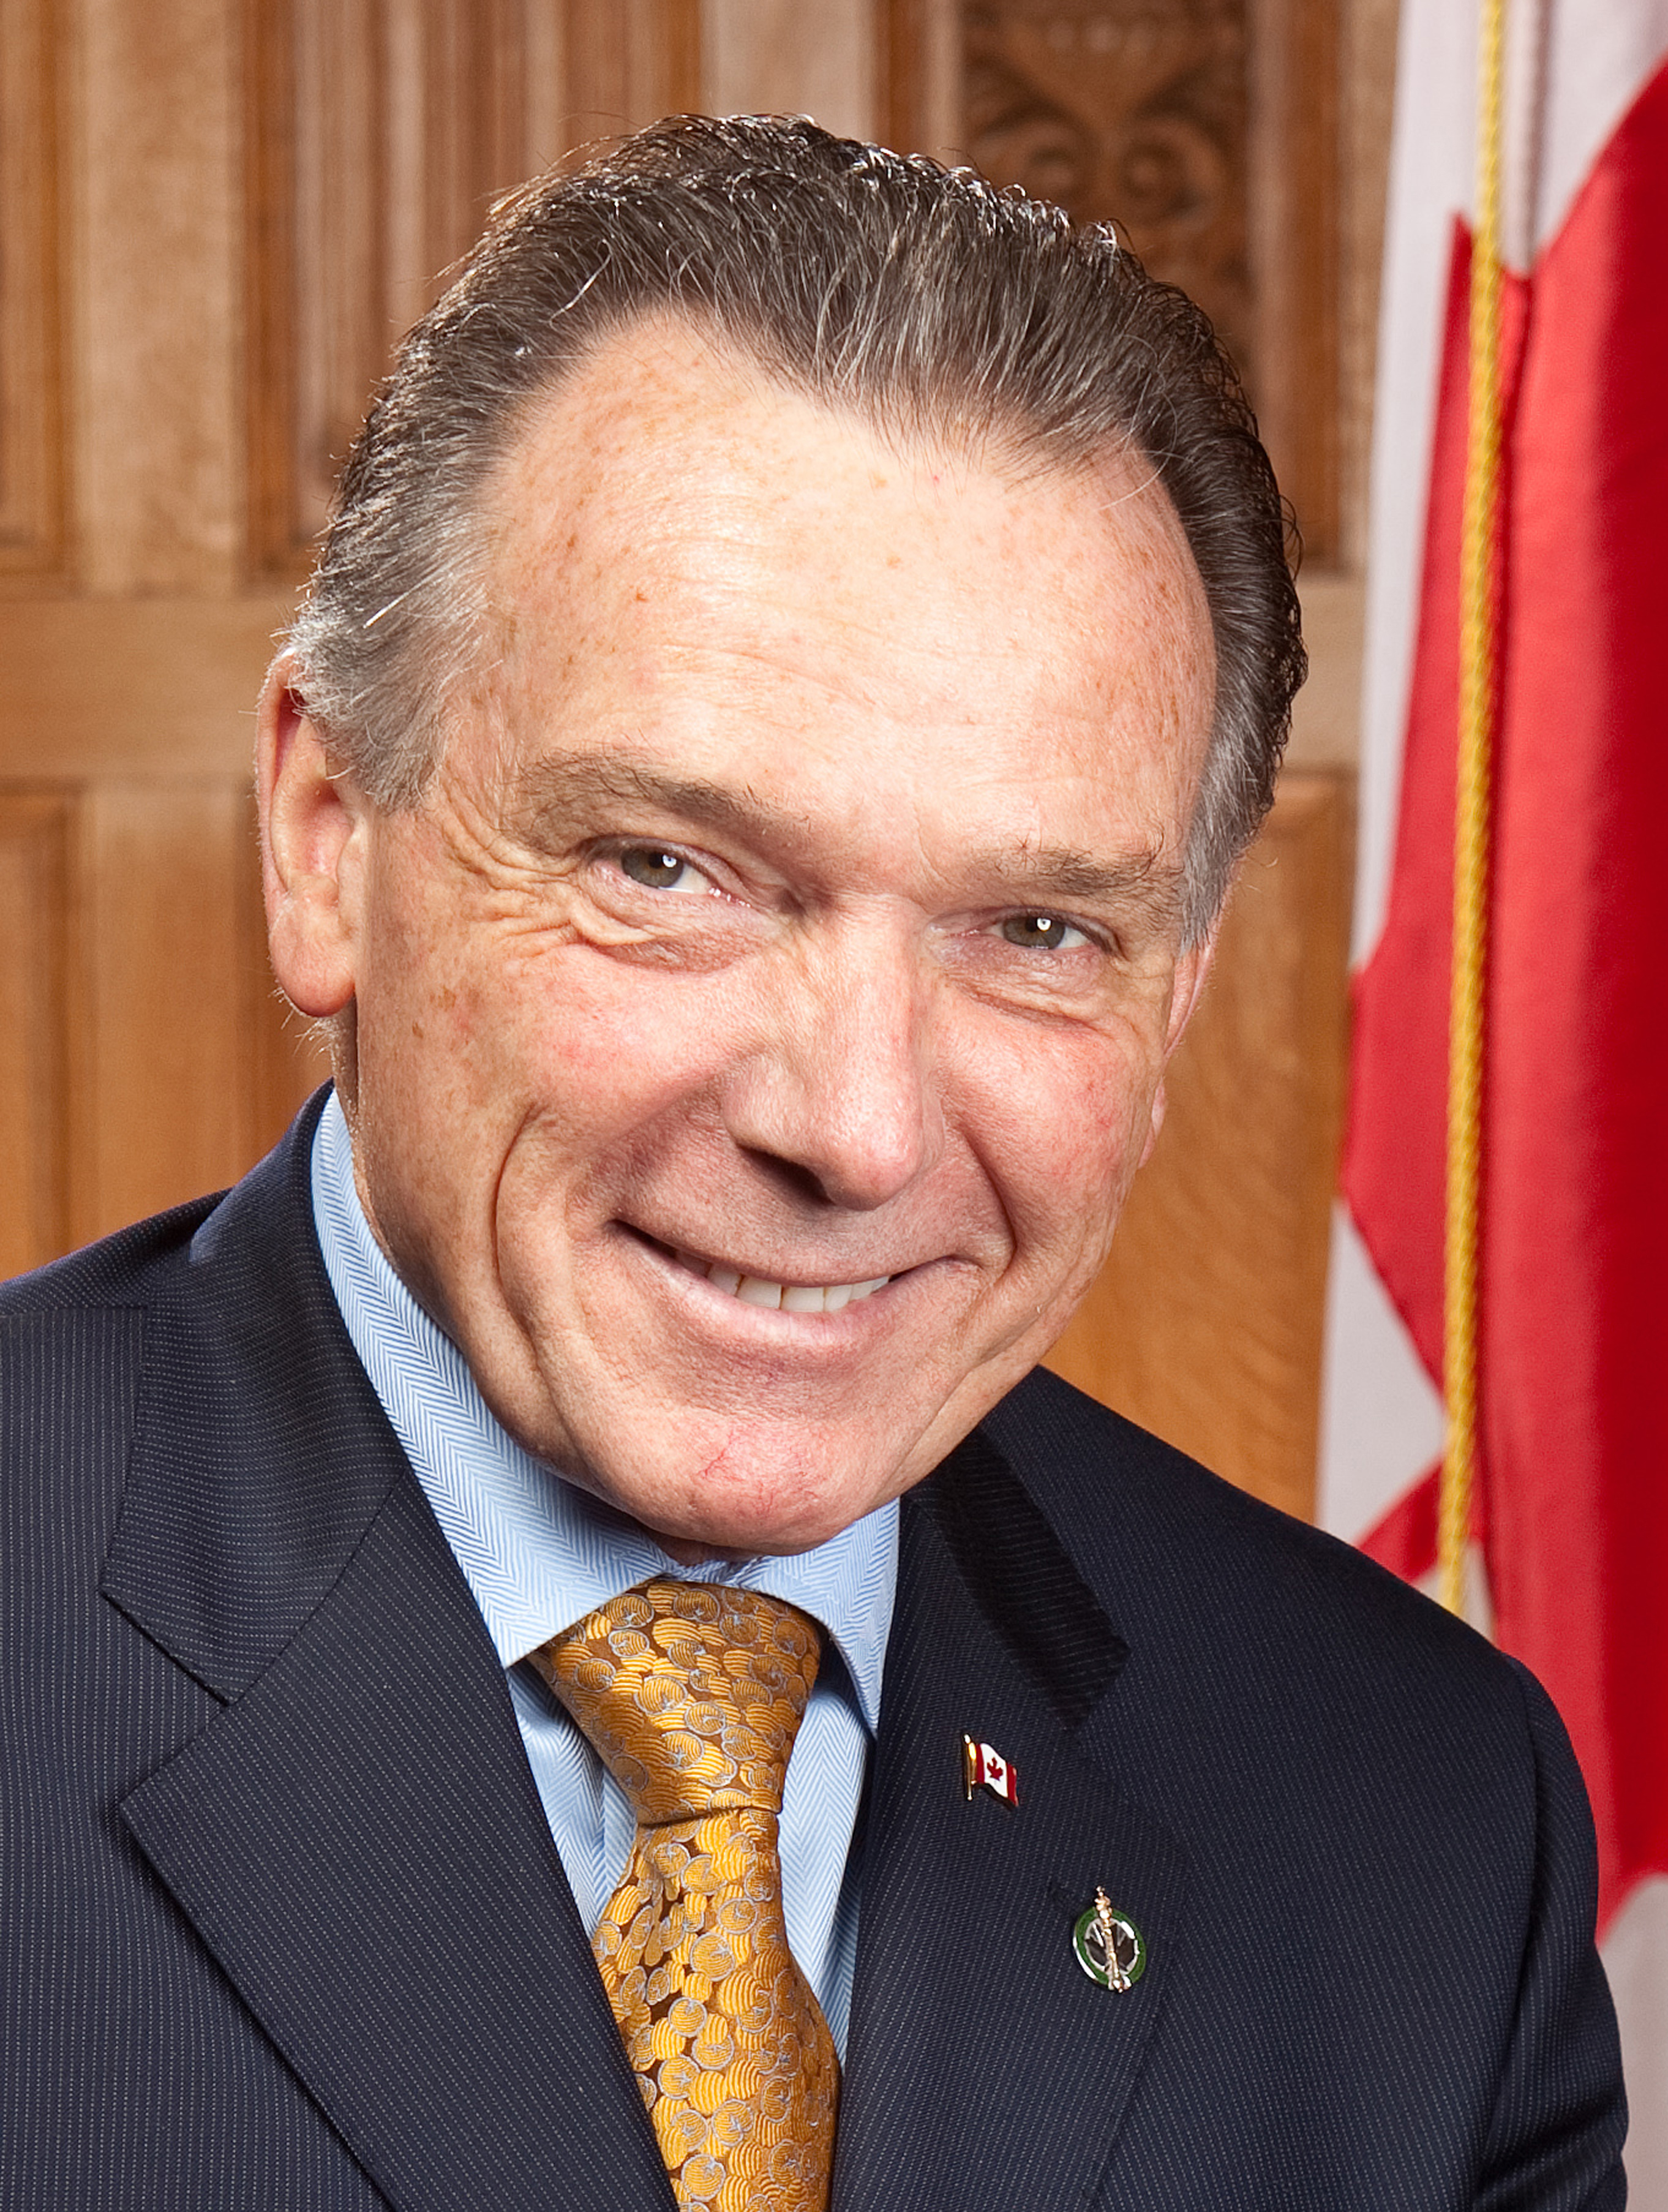 The Honourable Peter Kent, P.C., M.P., Minister of the Environment